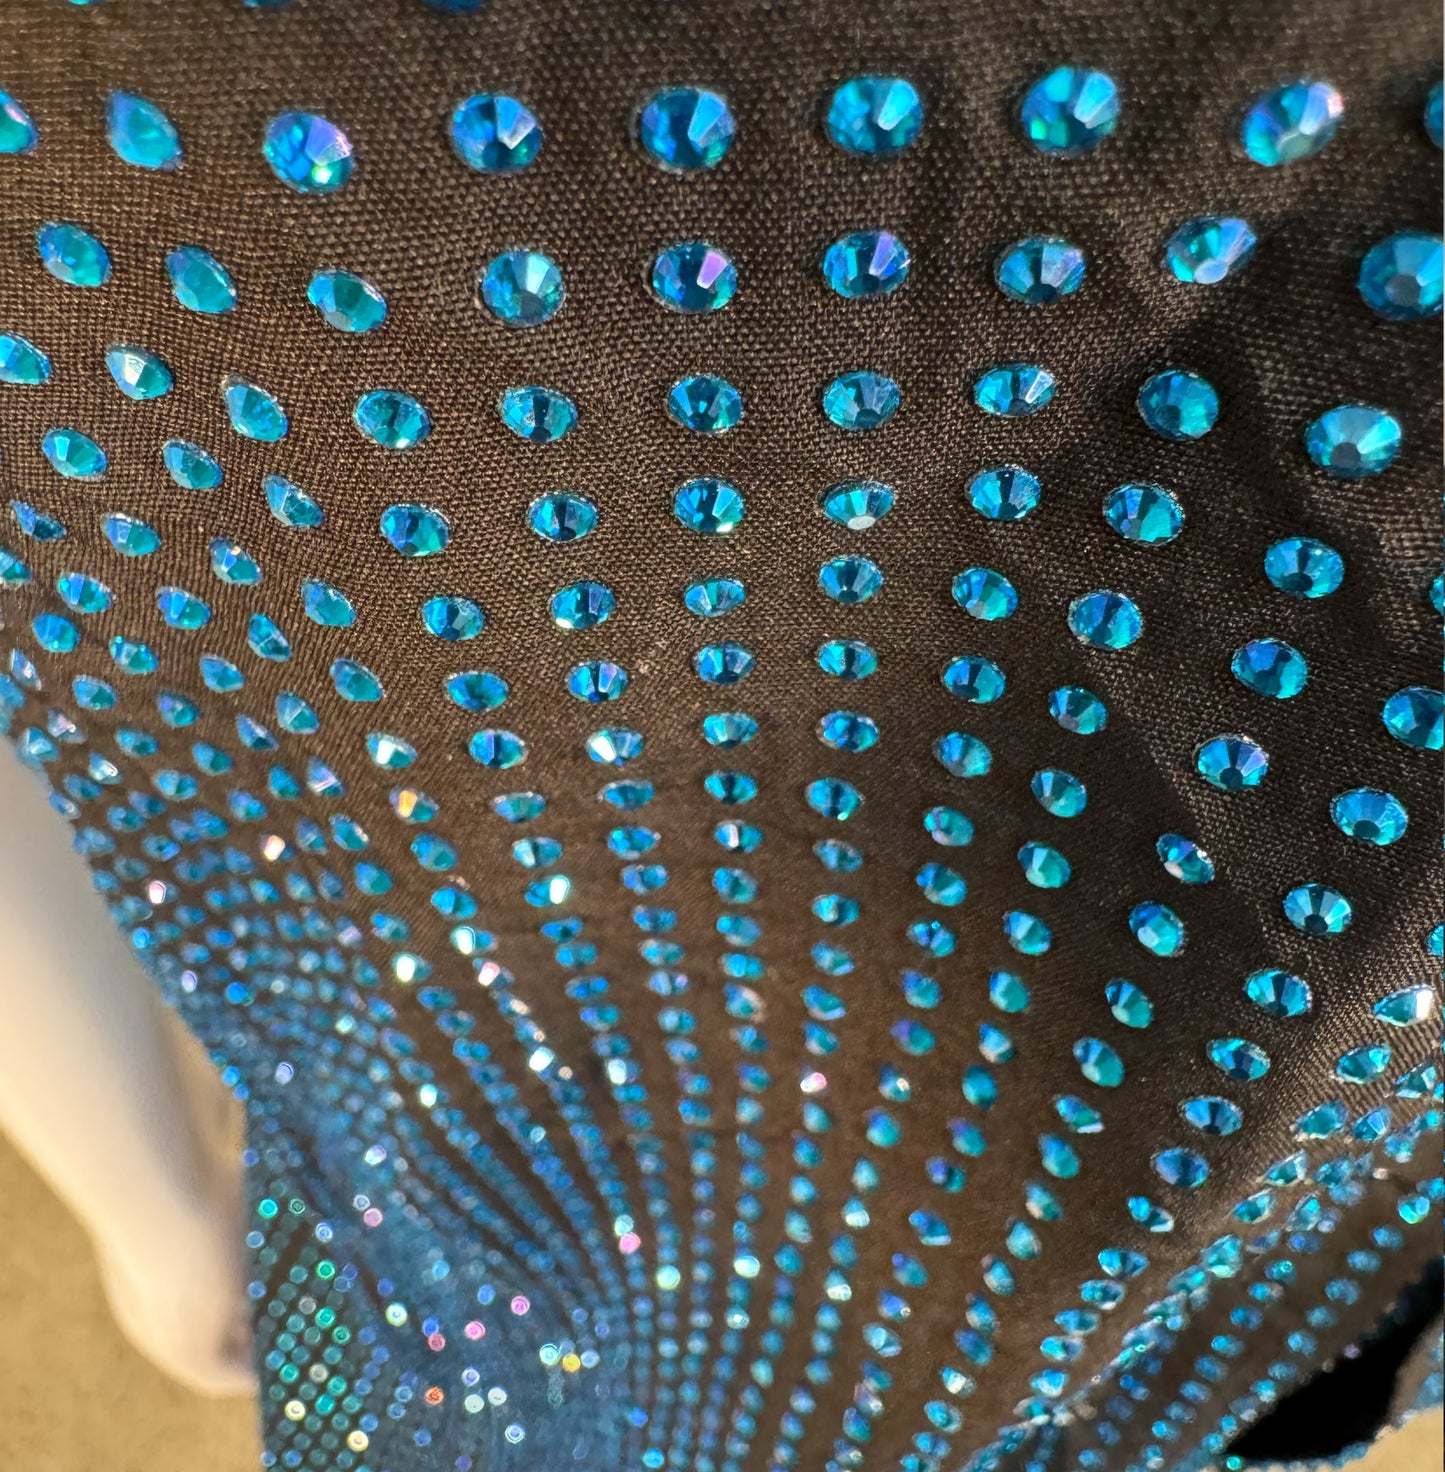 Looking down at Capri Blue Crystals on Black Fabric Dress Shirt (Short Sleeves) showing a close up of the rhinestone grid pattern and the sparkles as your focus shifts.